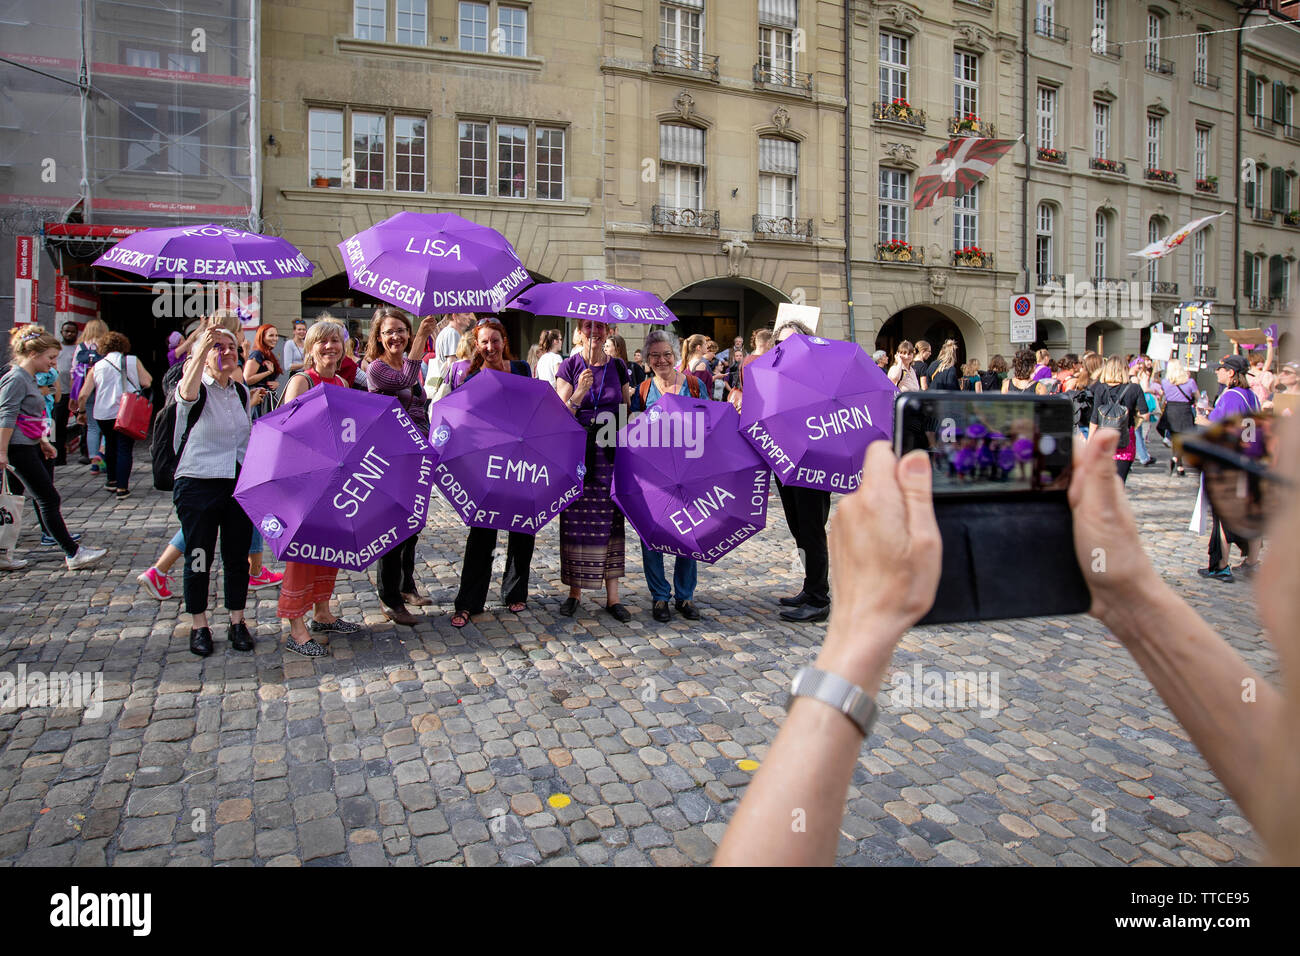 Women in the group 'FAM gegen Rasissmus' pose for a picture during the Frauenstreik march in Bern. The Frauenstreik - Womens Strike - brought record numbers of women to the streets in all the big cities in Switzerland. In the capitol Bern, more than 40.000 marched throughout the city to fight for gender equality. Stock Photo